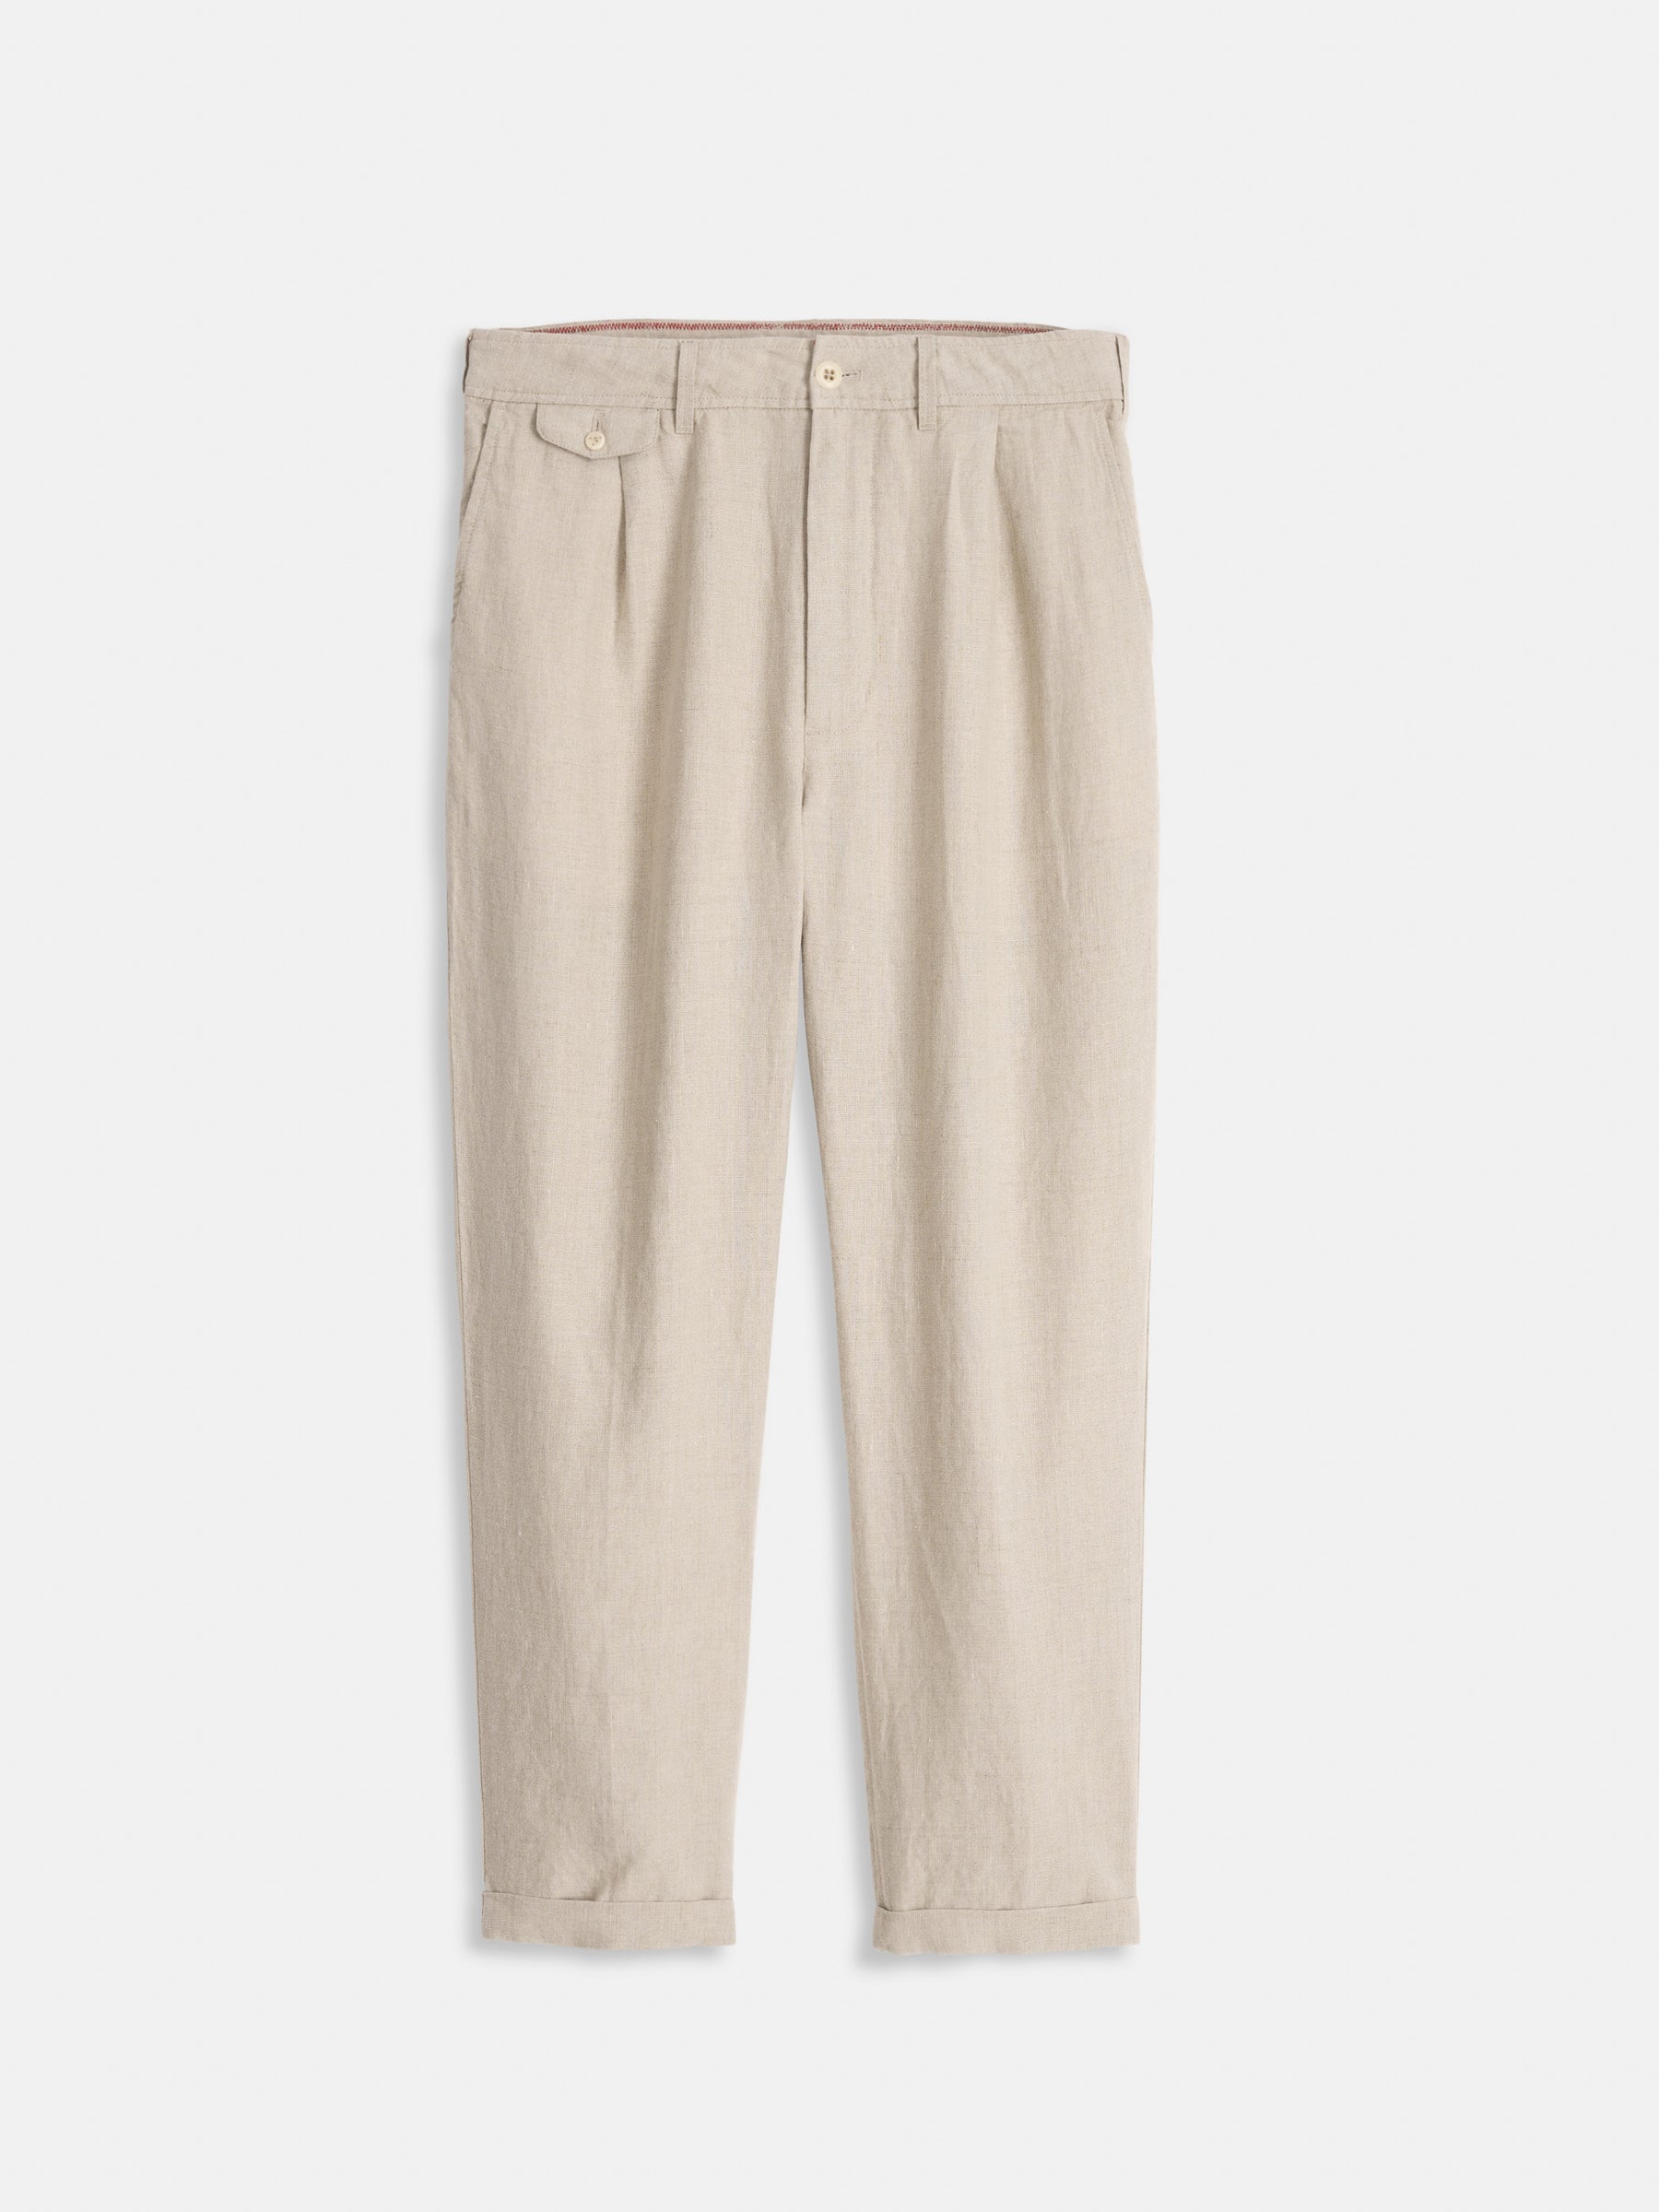 Pleated Pant in Flax Linen Flax